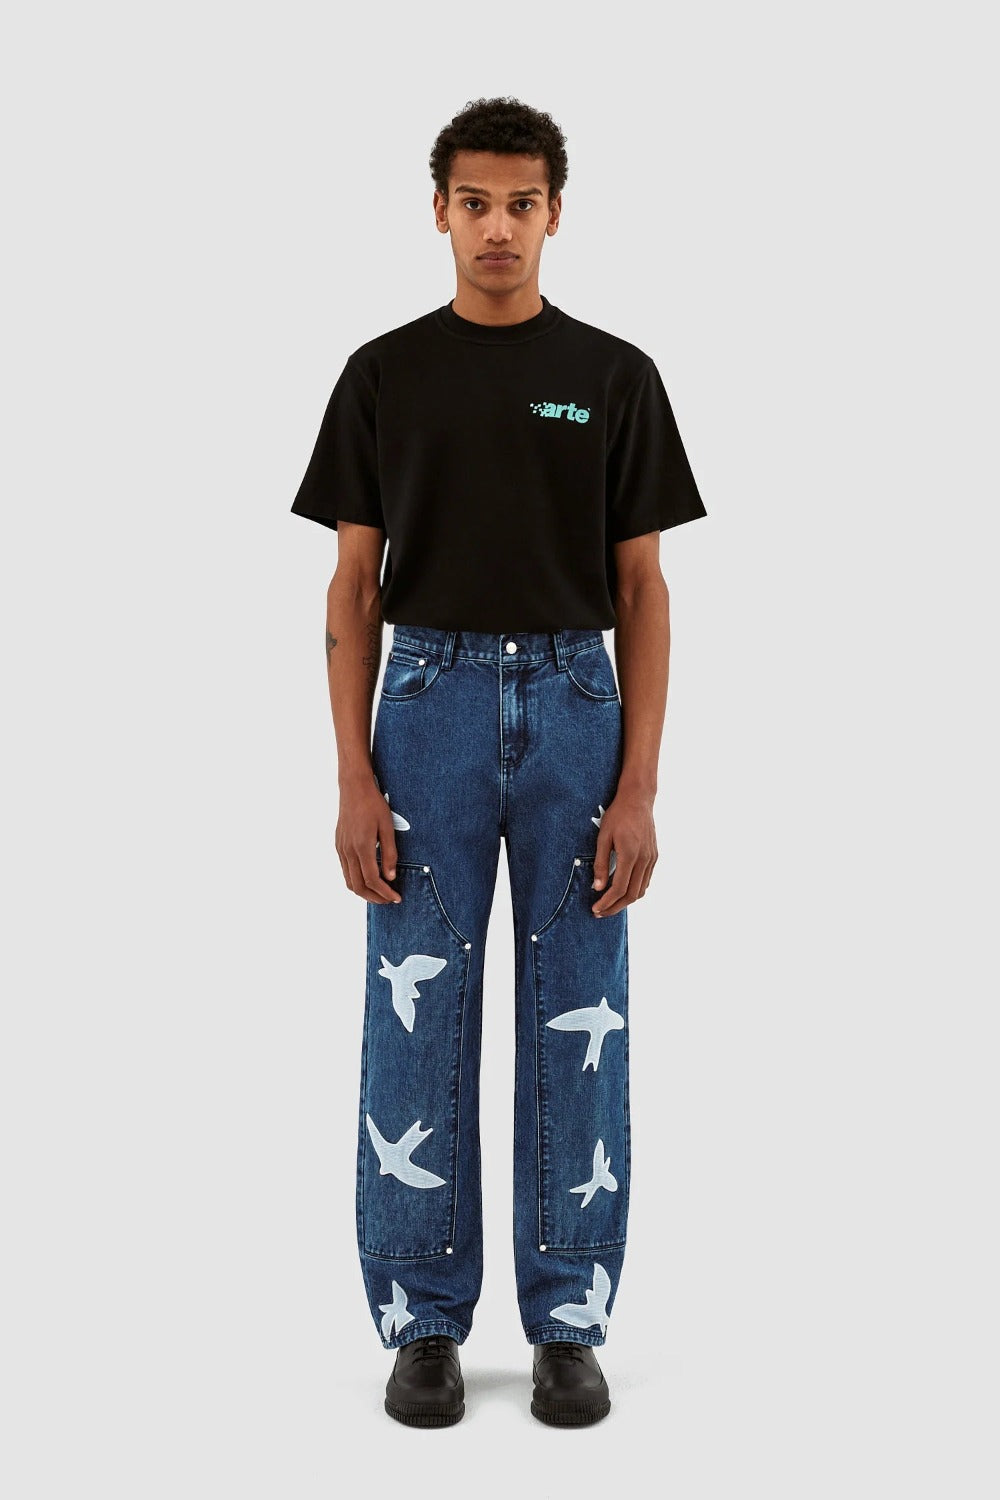 Parker Workwear Birds Pants #Washed Blue [AW23-005P]